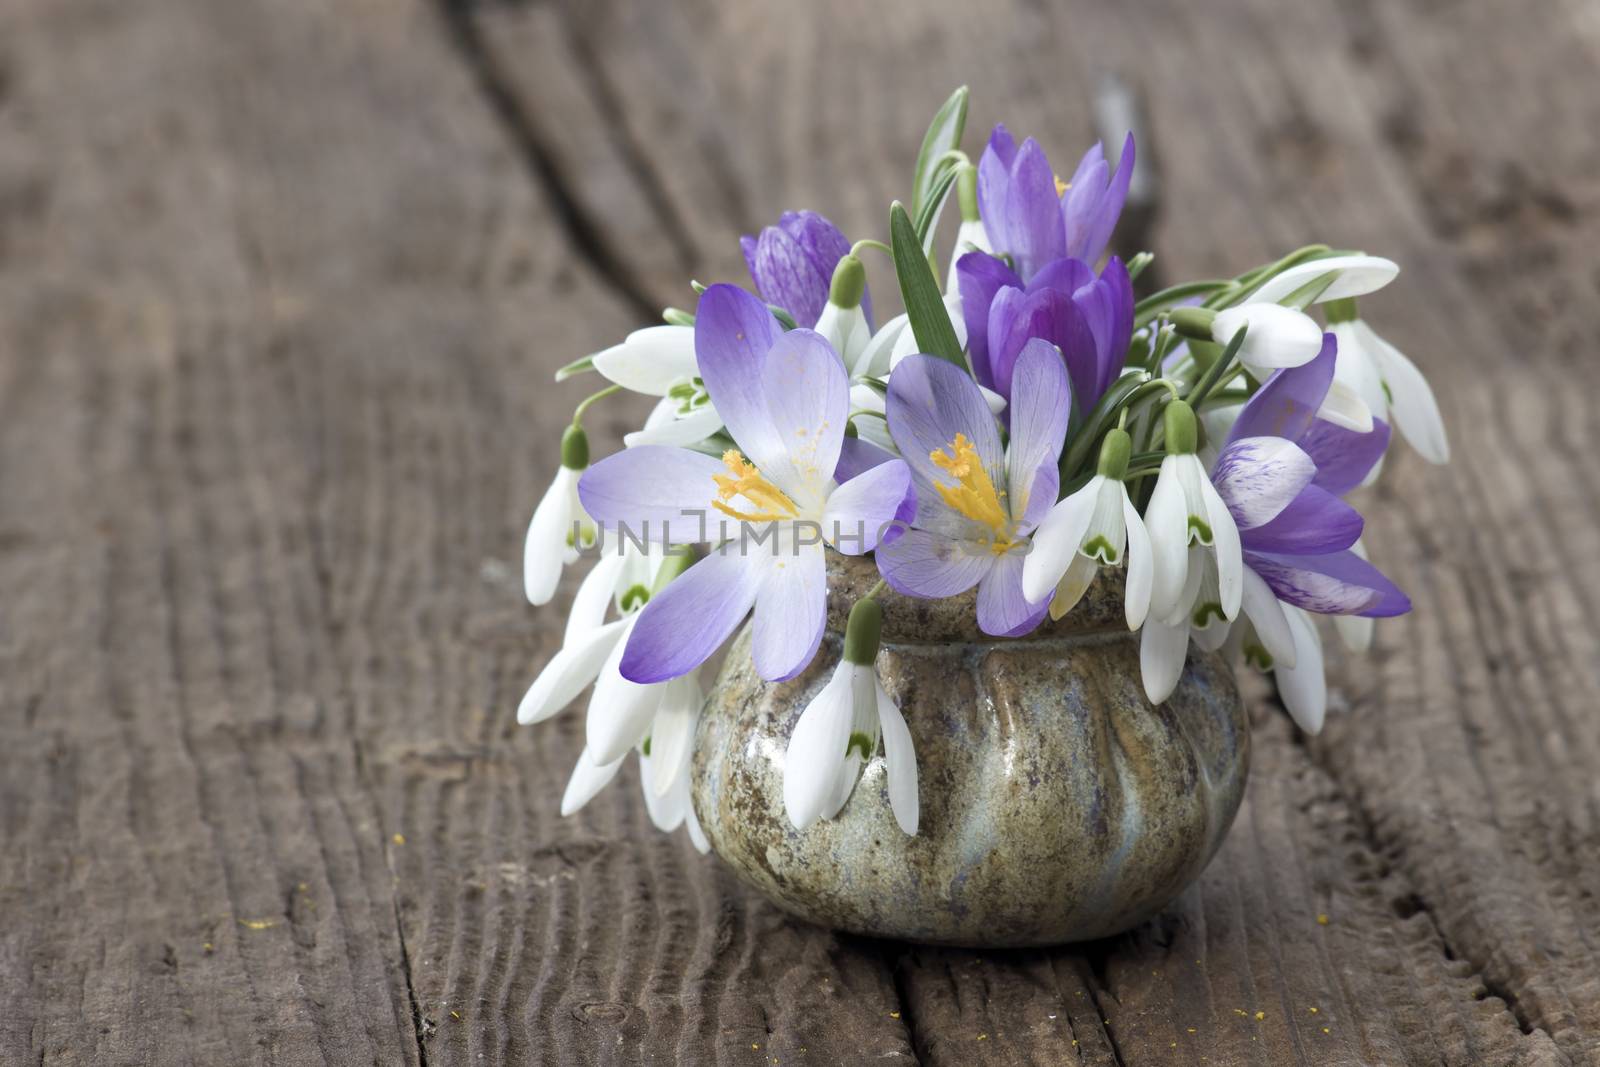 Bunch of crocus and snowdrops in a vase on the wooden table.